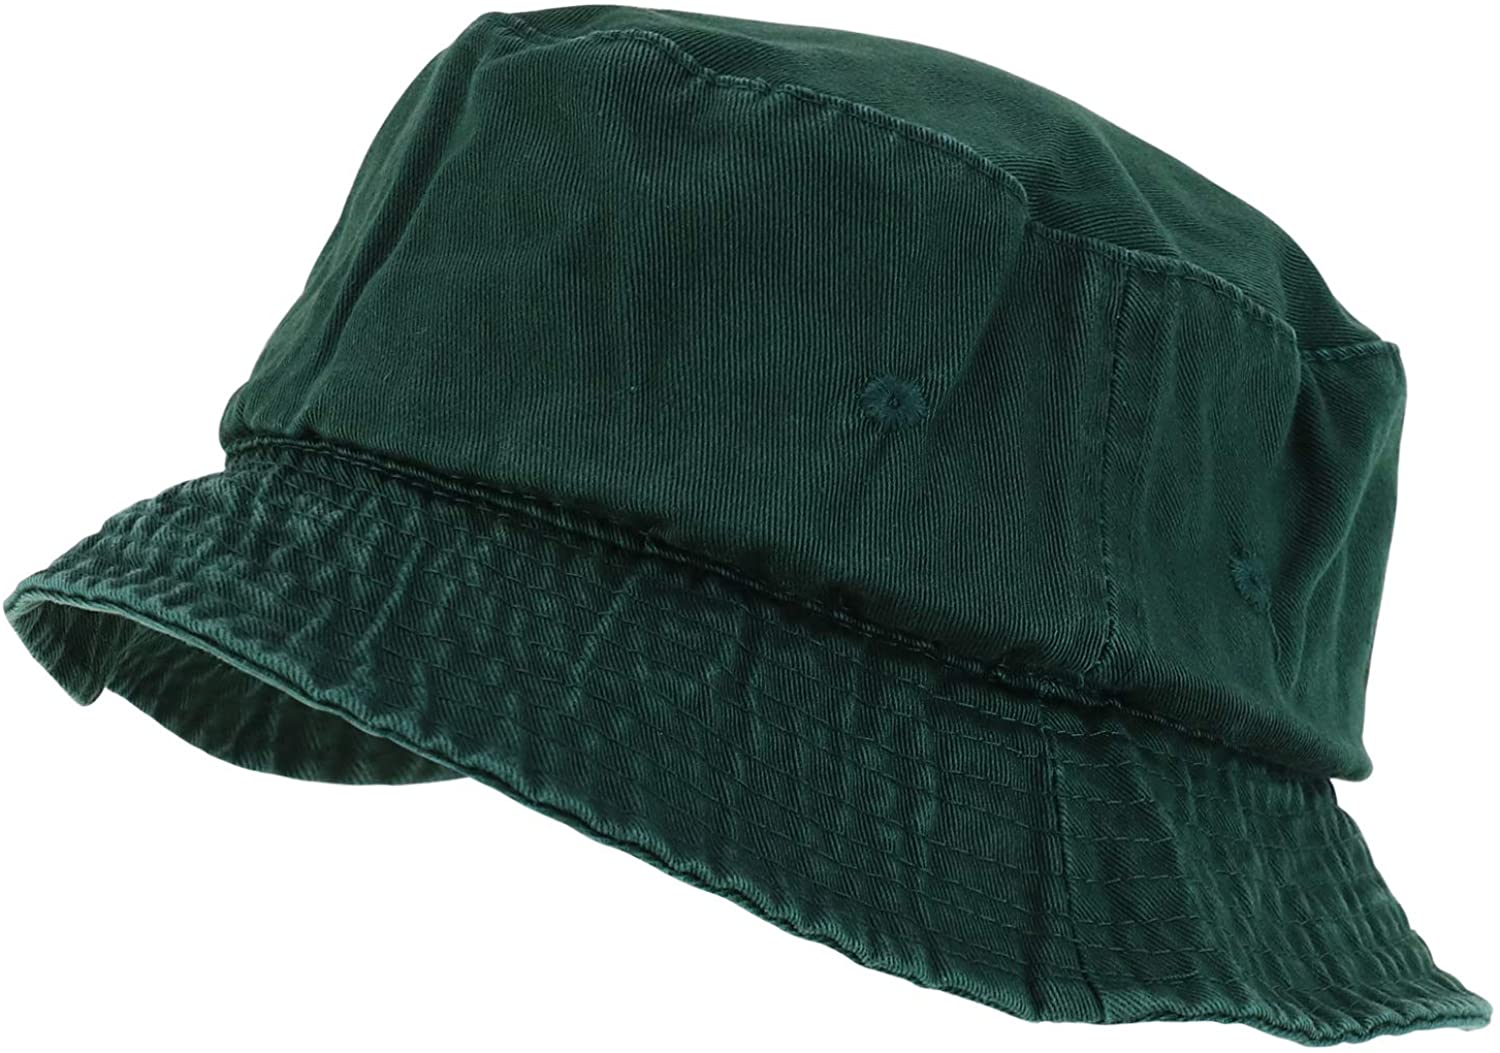 Armycrew Garment Washed Cotton Twill Casual Bucket Hat - S/M to 2XL/3XL